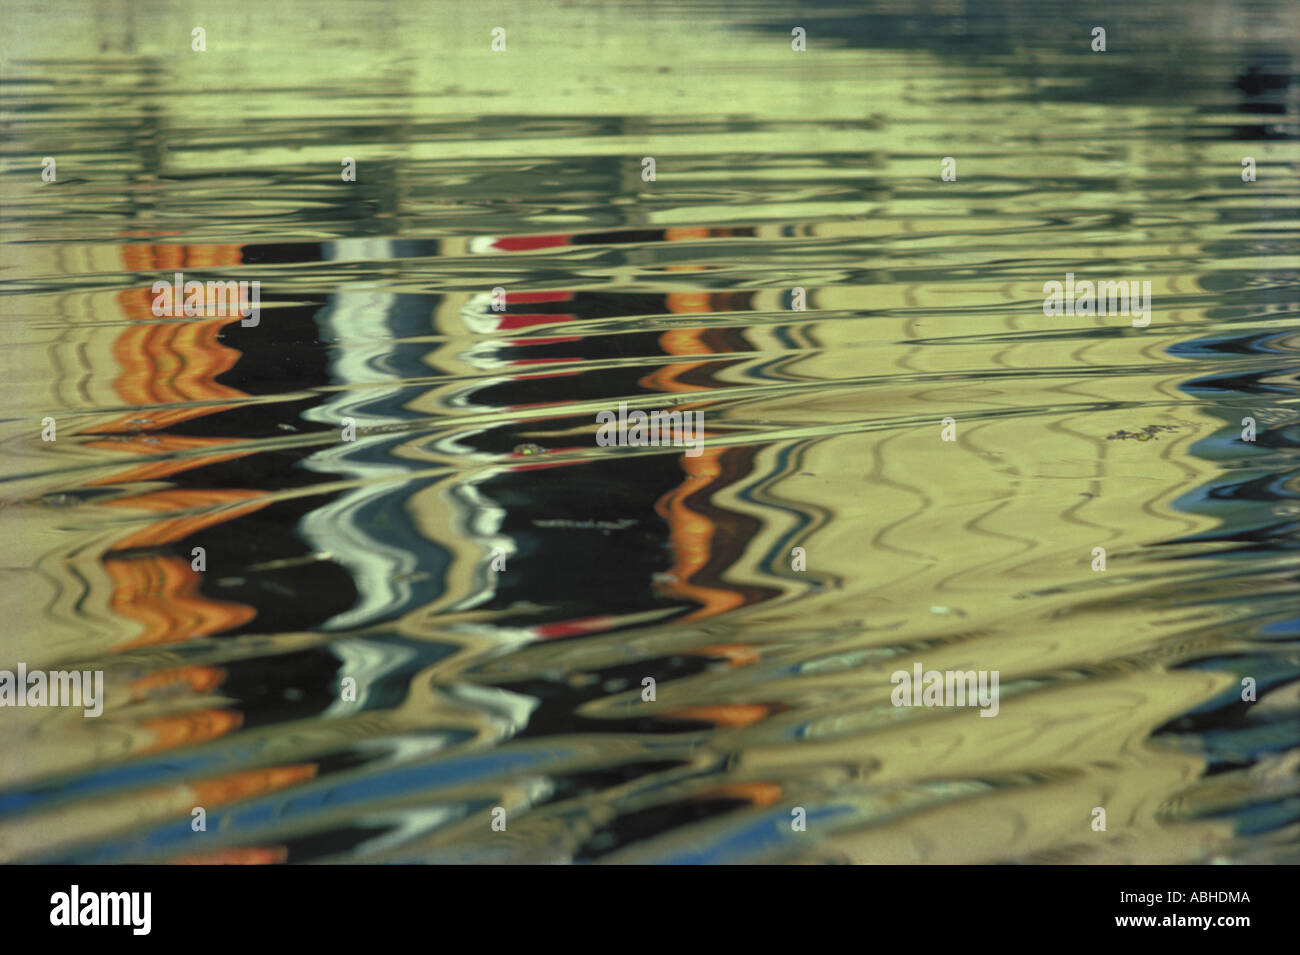 AMA76933 Nature closeup conceptual abstract showing contemplative water reflection in water Stock Photo